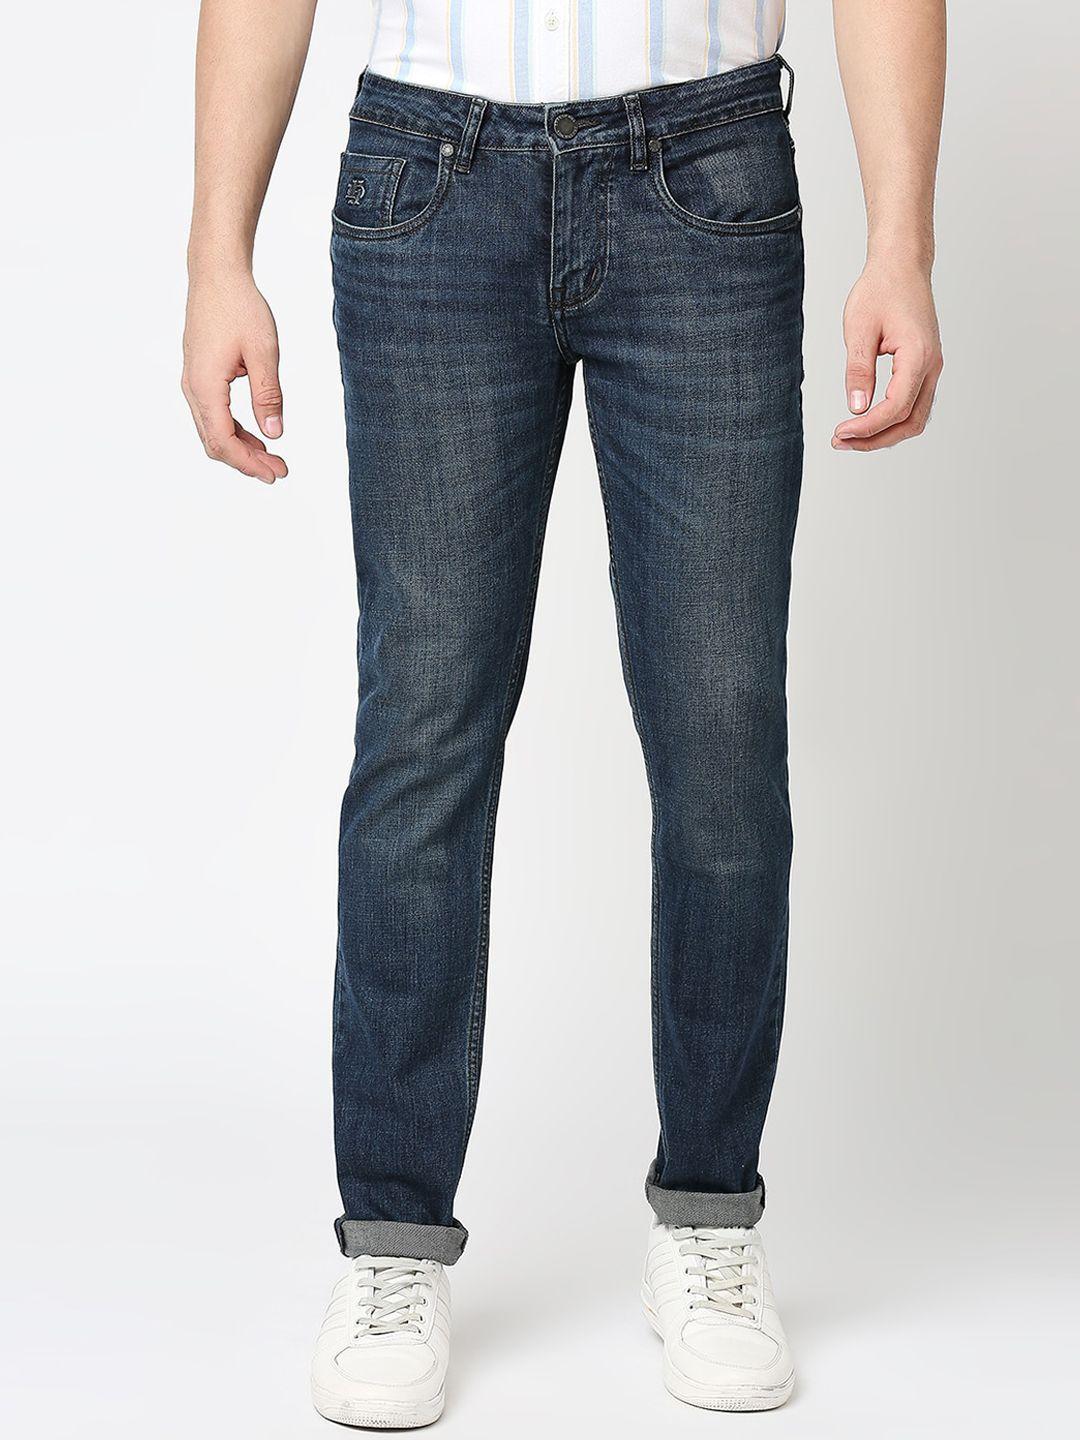 dragon hill men tapered fit light fade whiskers & chevrons stretchable jeans